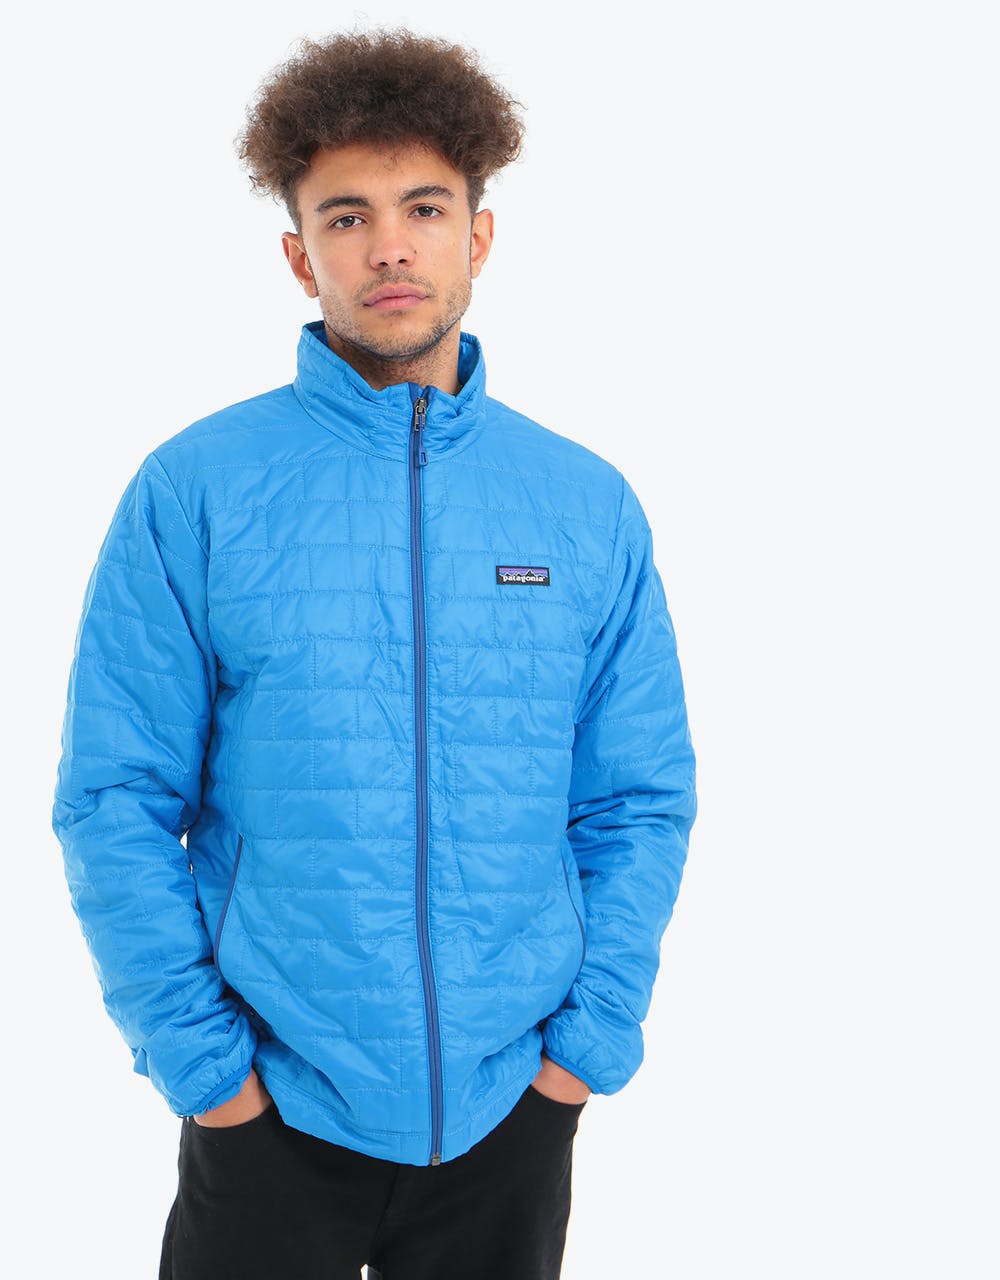 Patagonia Nano PuffÂ® Jacket - Andes Blue w/ Andes Blue